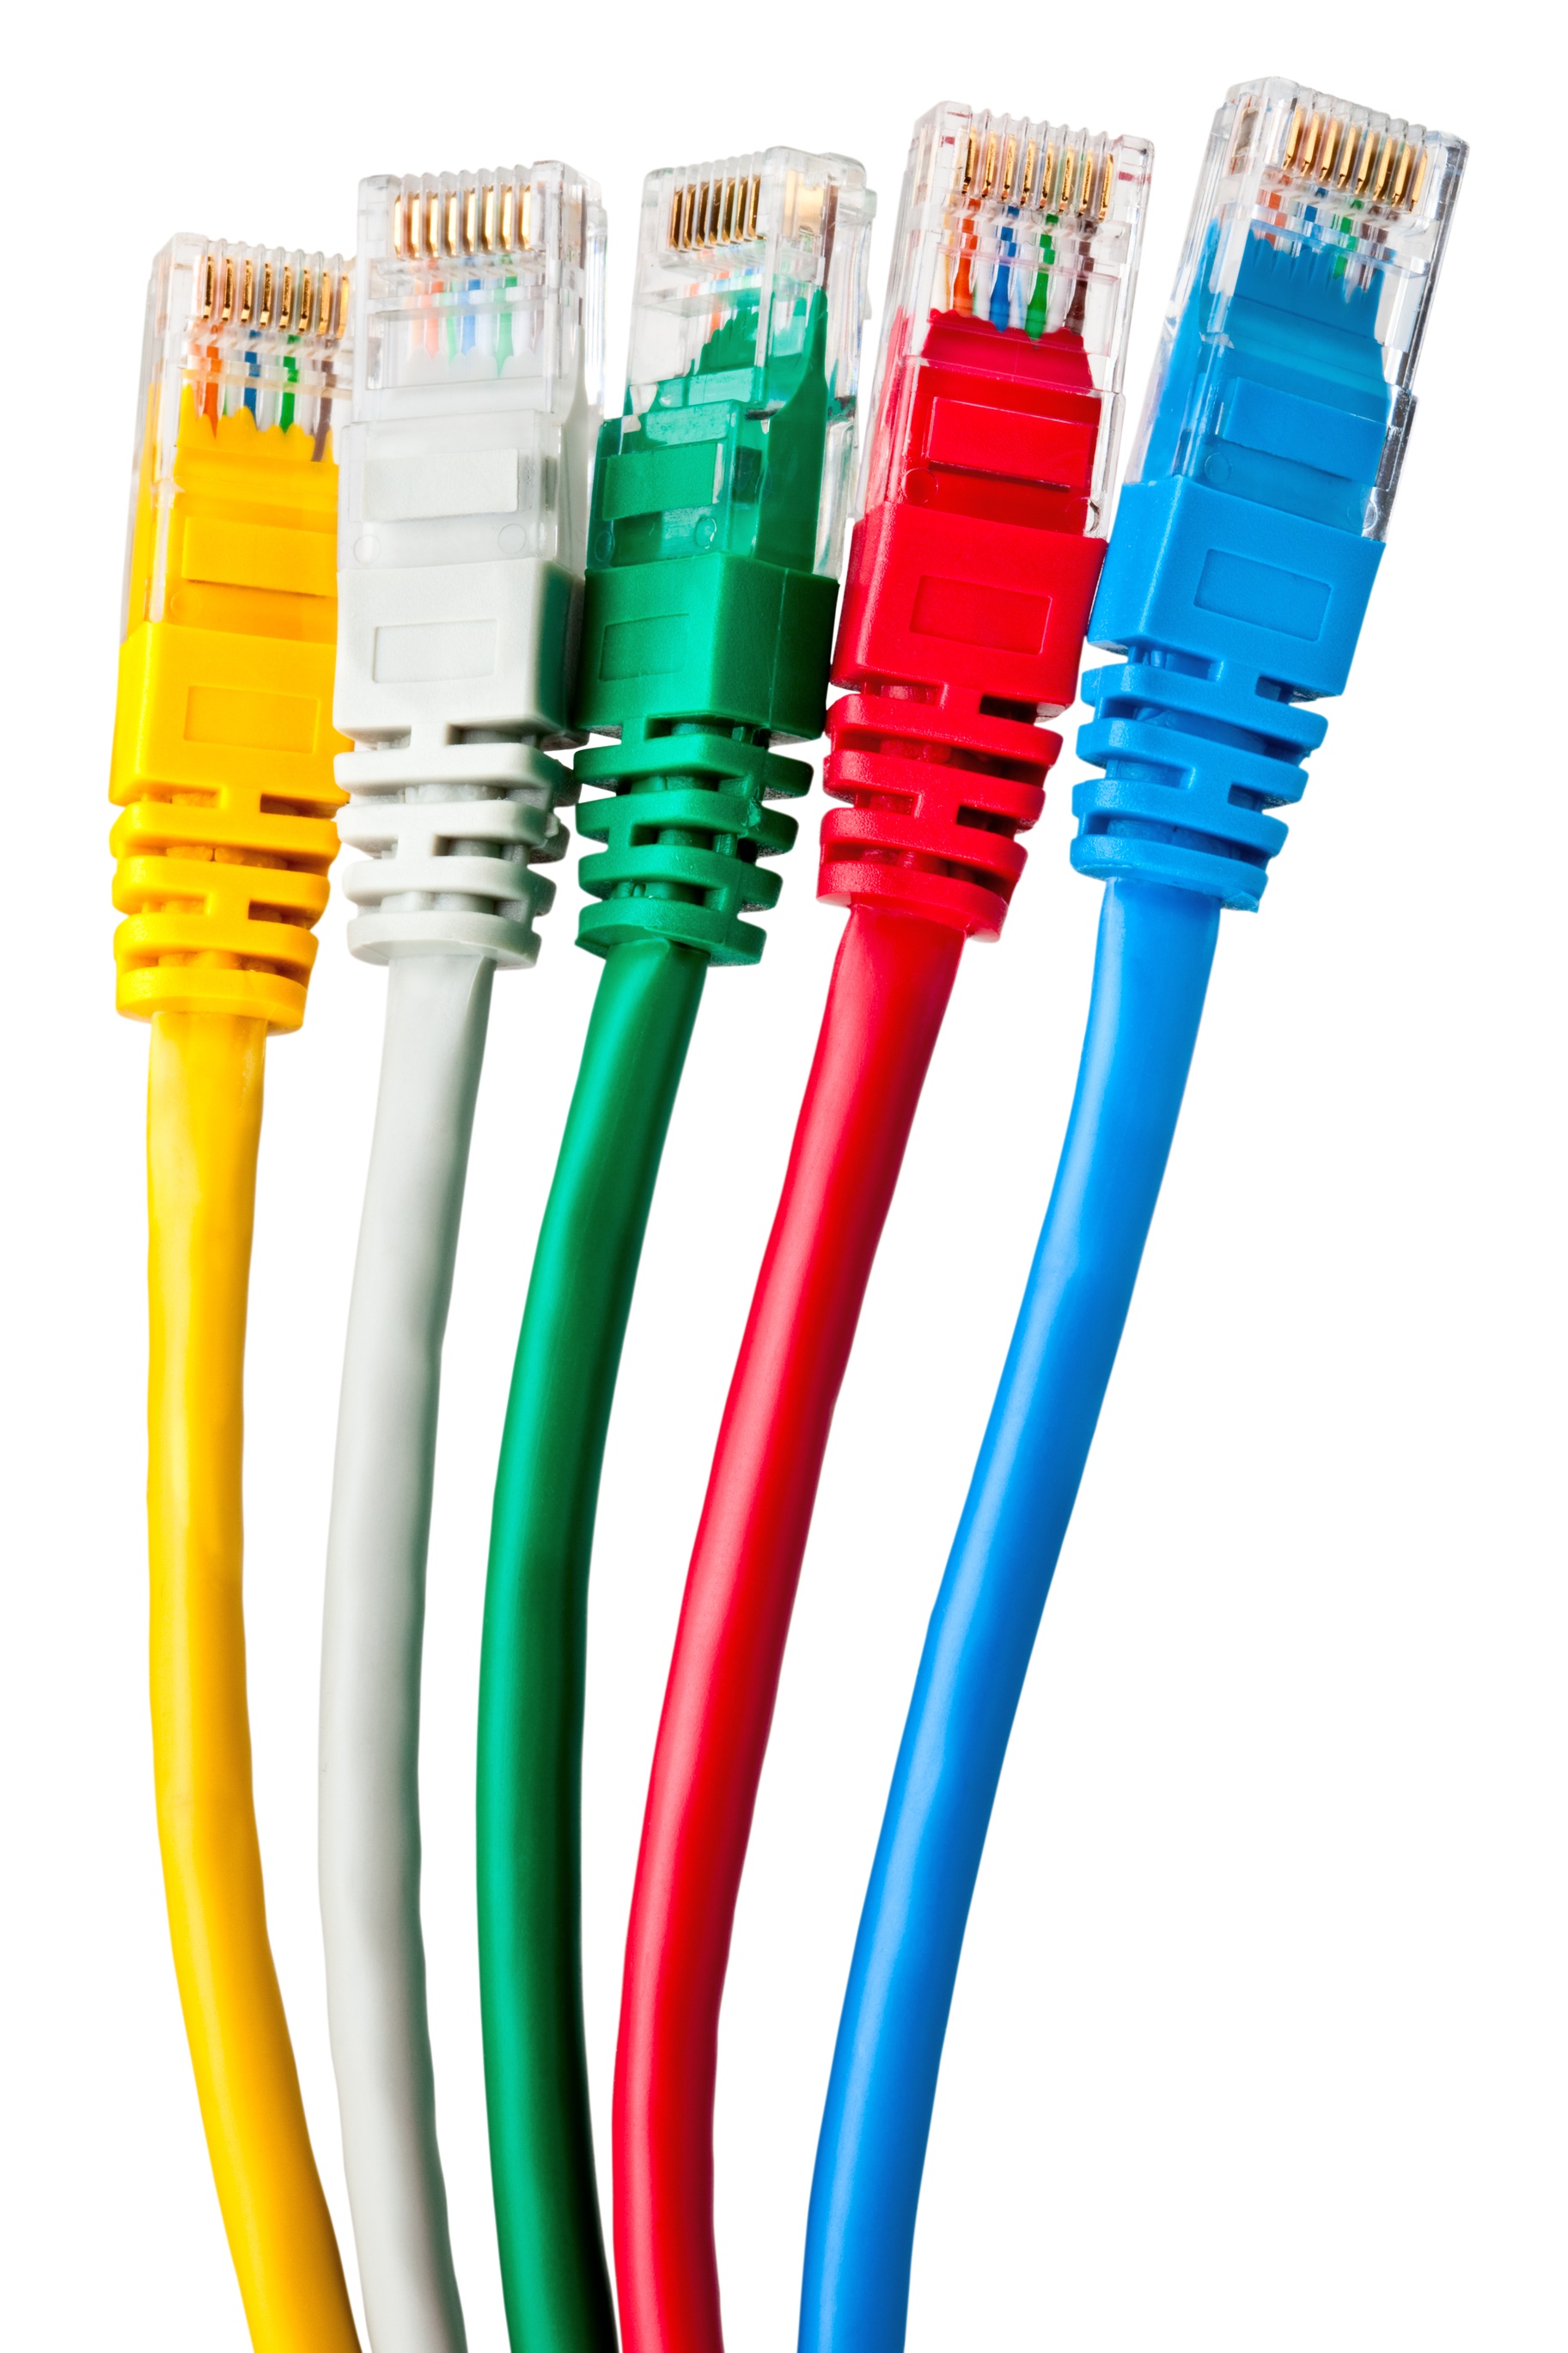 Differences Between Cat5e, Cat 6, and Cat6a Ethernet Cables